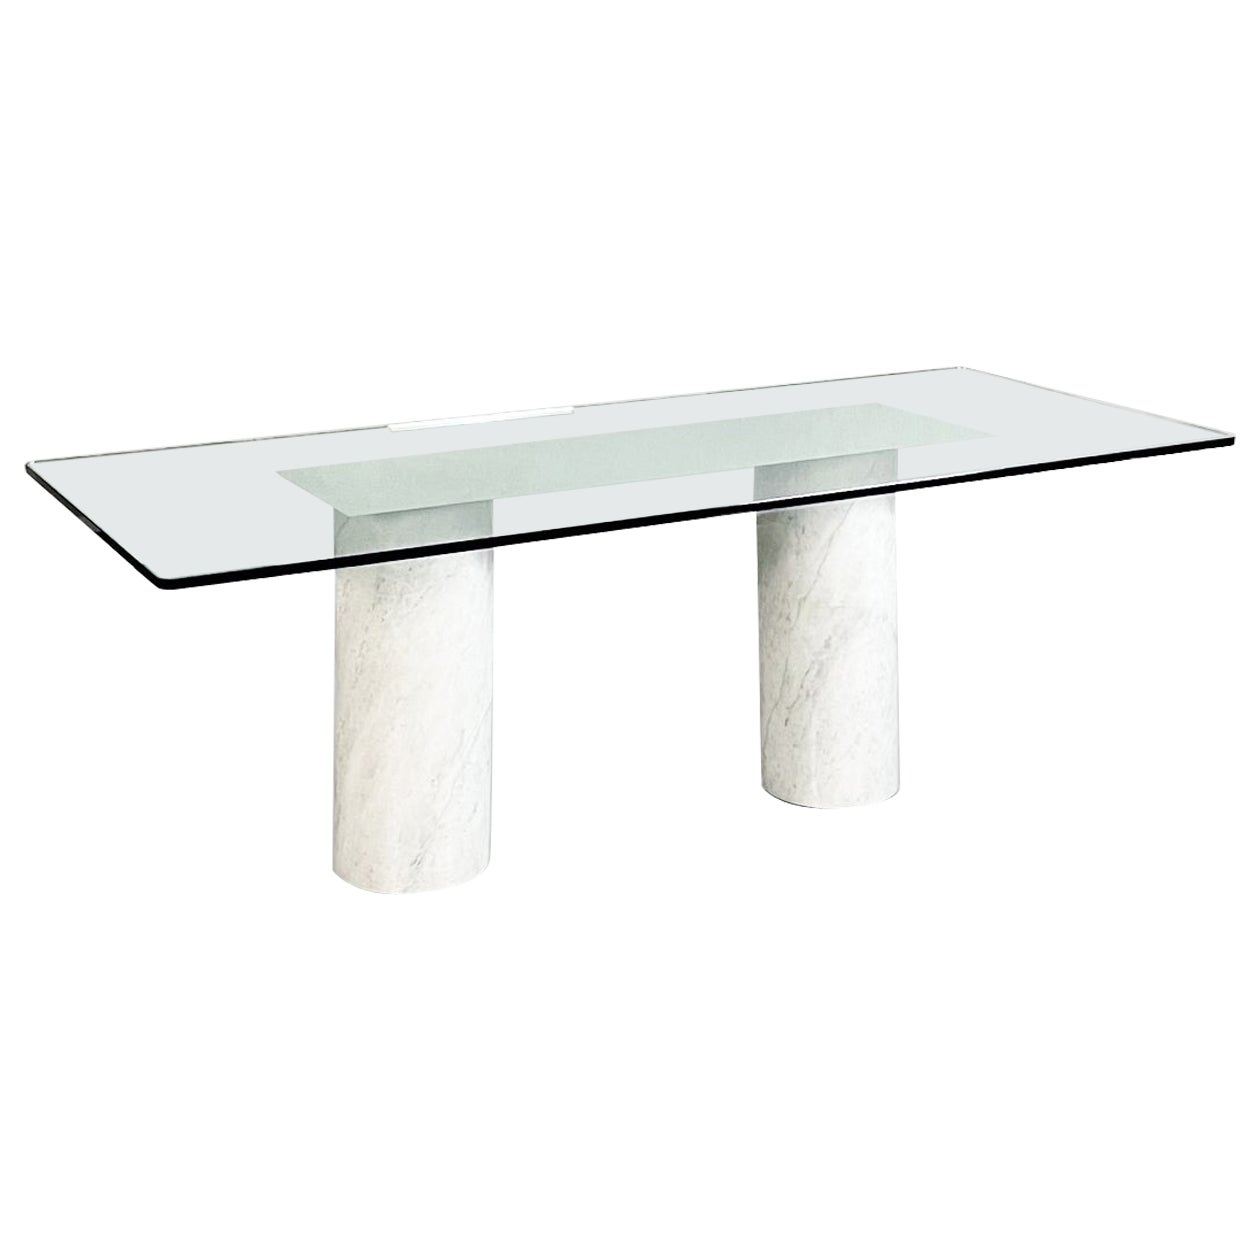 Italian Mid-Century Rectangular Dining Table in Glass, Mirror and Marble, 1980s For Sale